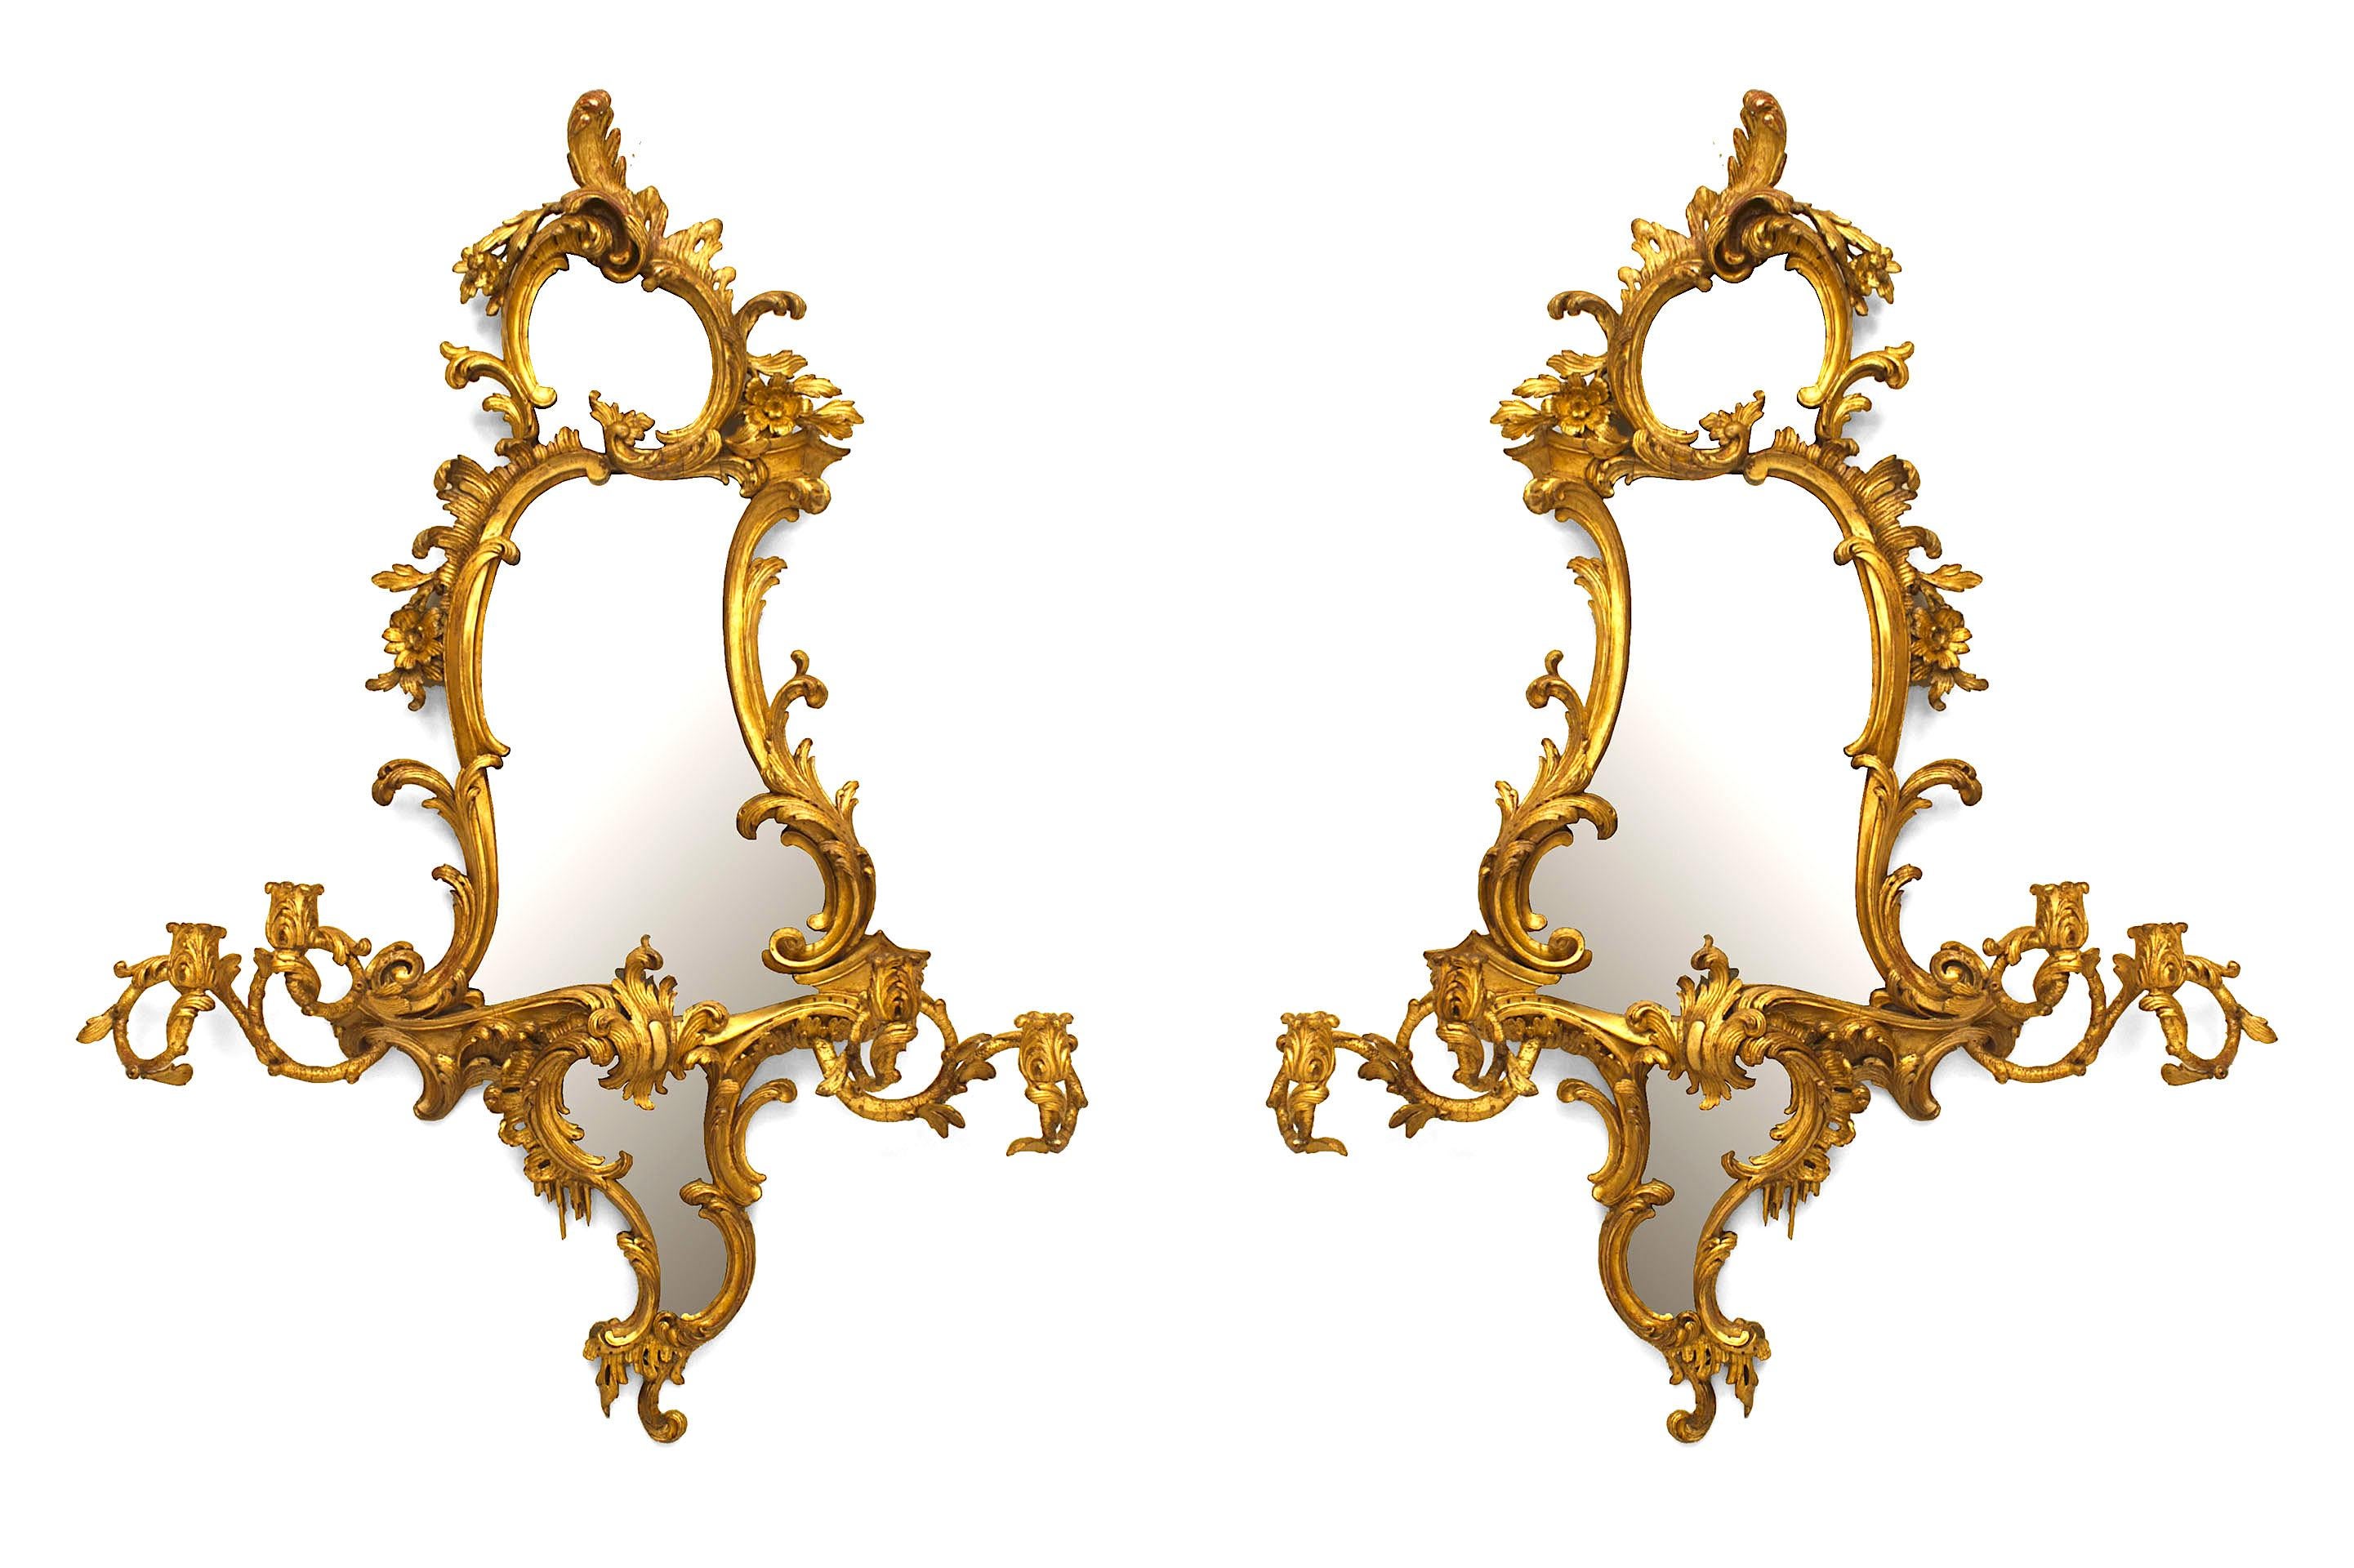 Pair of English George II (circa 1750) giltwood shaped form wall mirrors / girandoles with elaborate carved scroll designs and two Pairs of lights emanating from the center. (PRICED AS Pair)
